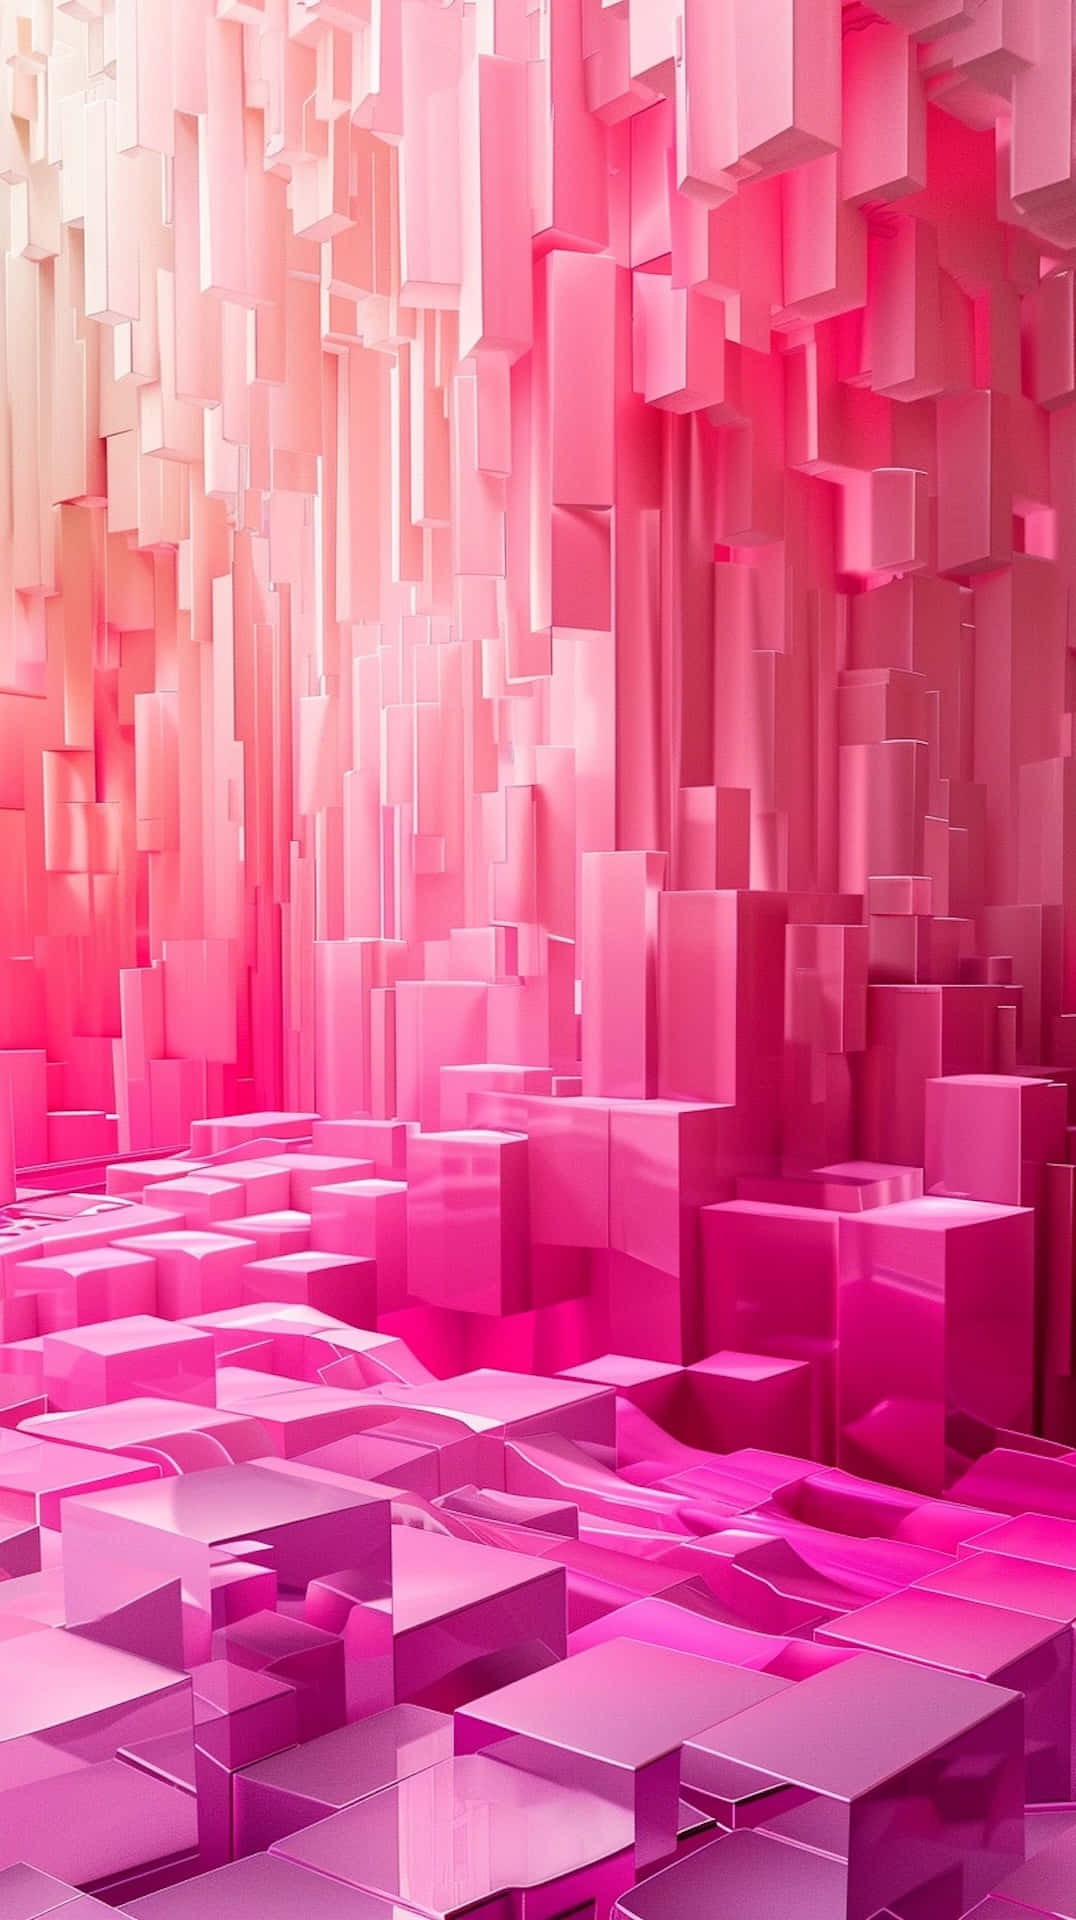 Abstract Pink3 D Geometric Background Wallpaper